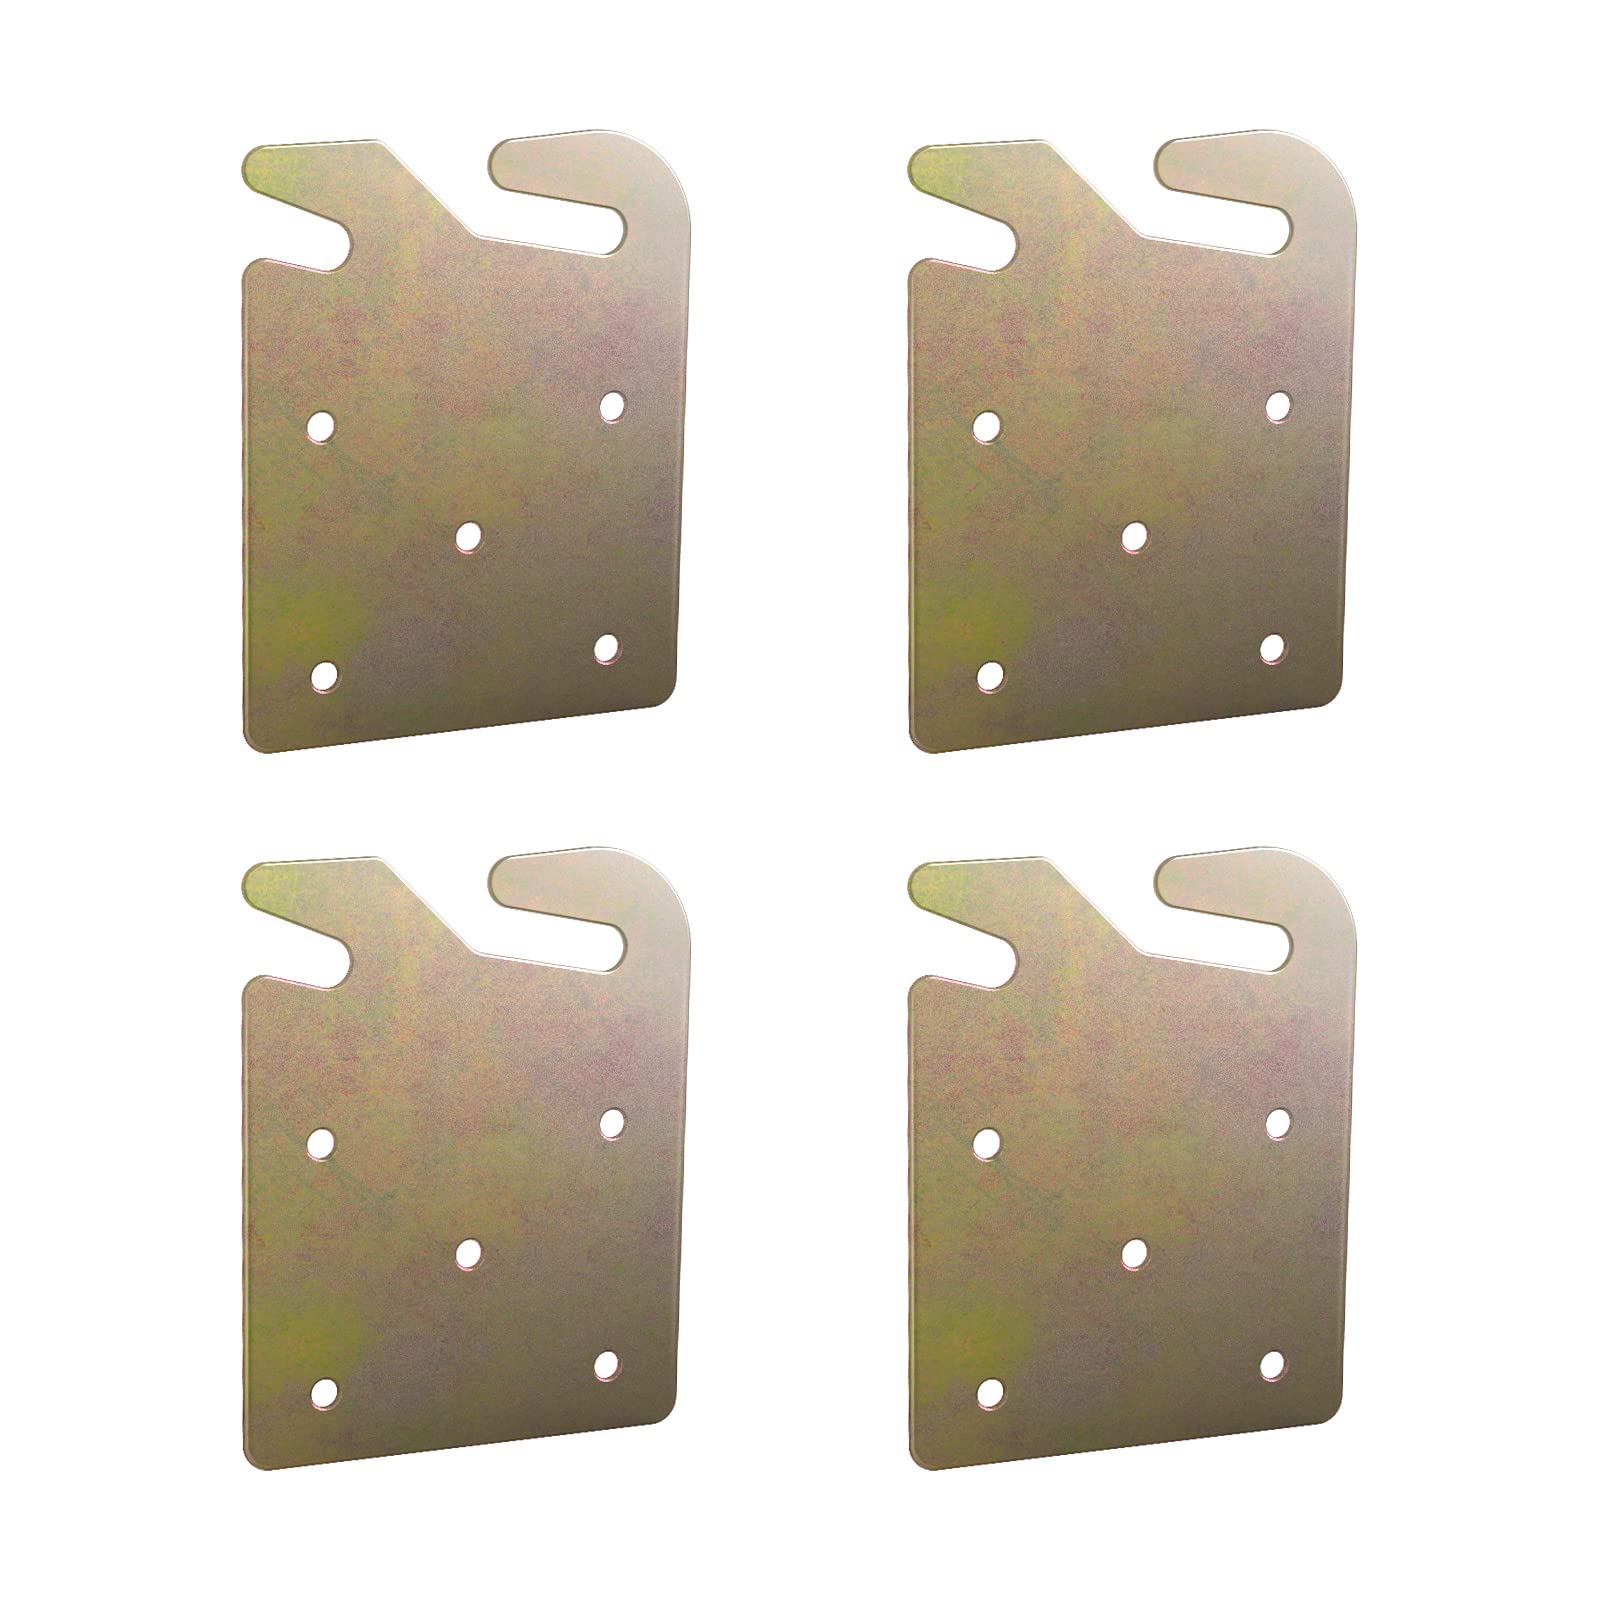 Bed Frame Brackets 4PCS Wood Bed Frame Hardware Universal Replacement Parts Bed Rail Hook Plates for Headboard and Footboard